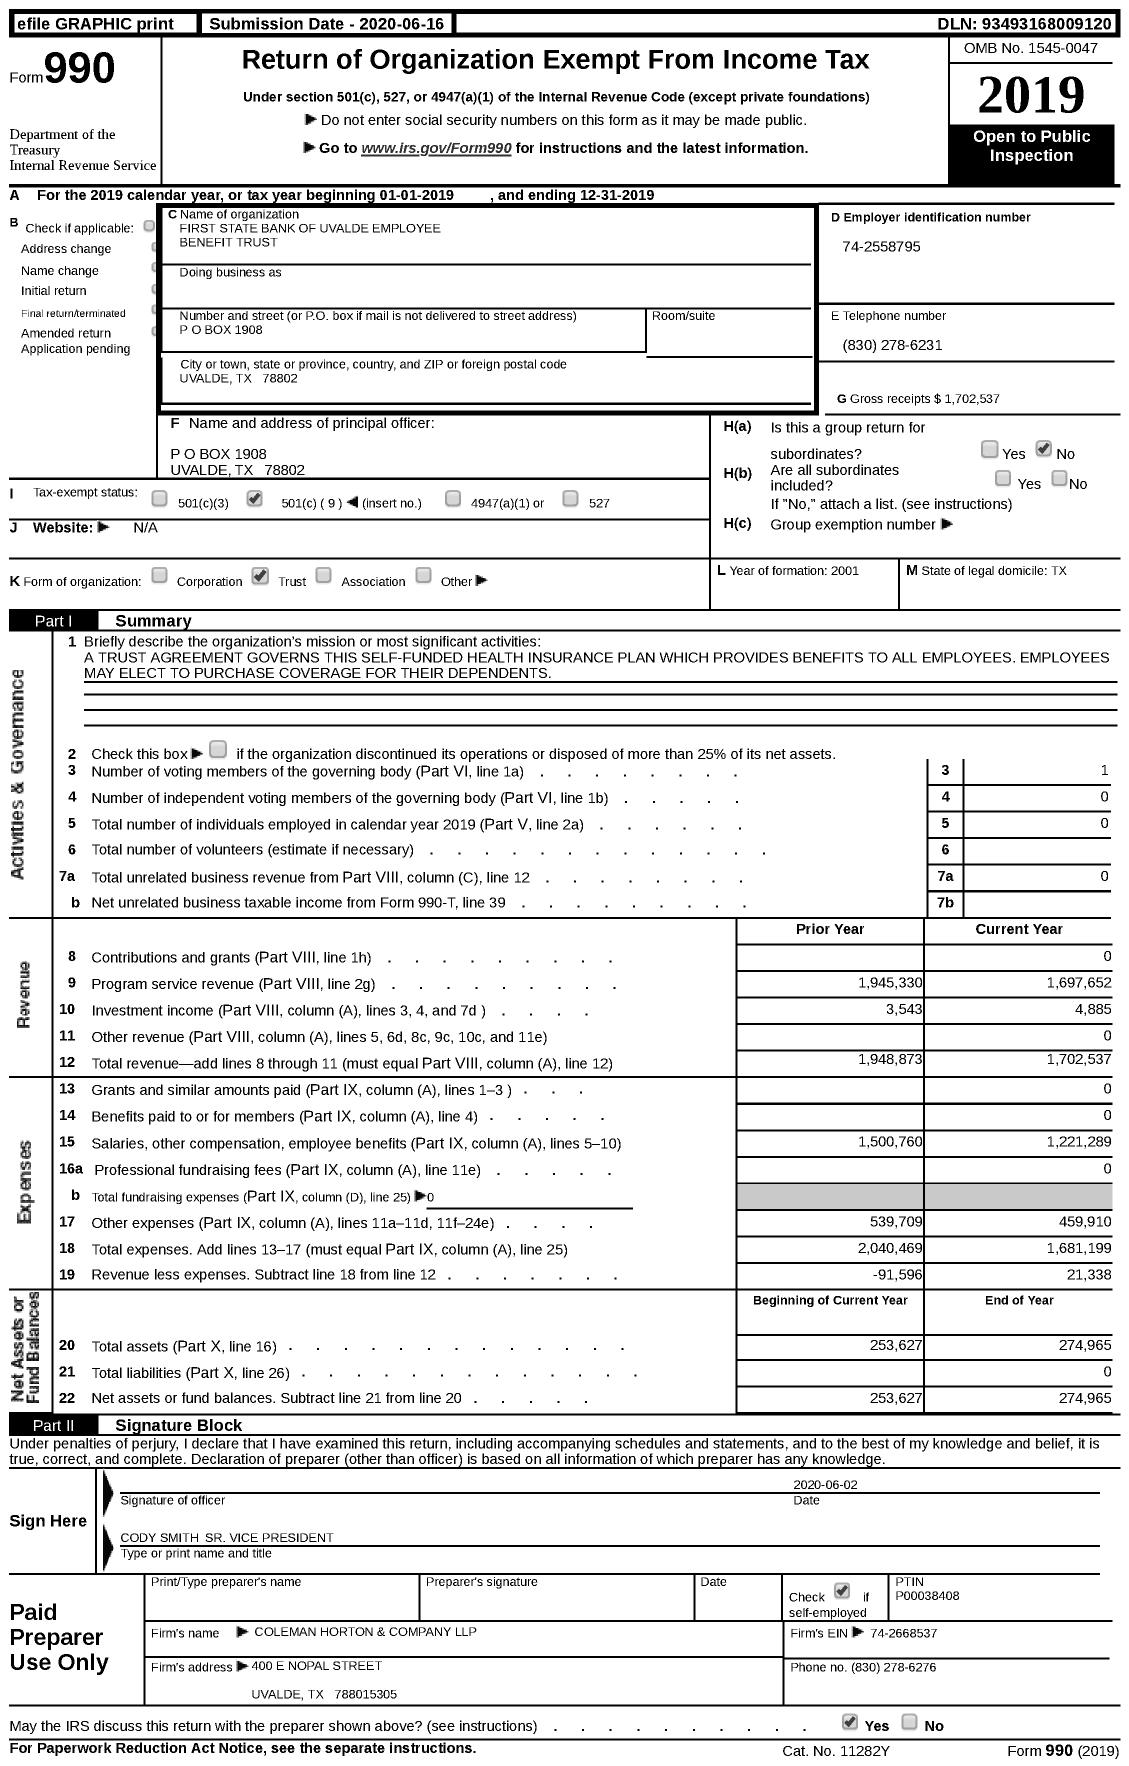 Image of first page of 2019 Form 990 for First State Bank of Uvalde Employee Benefit Trust